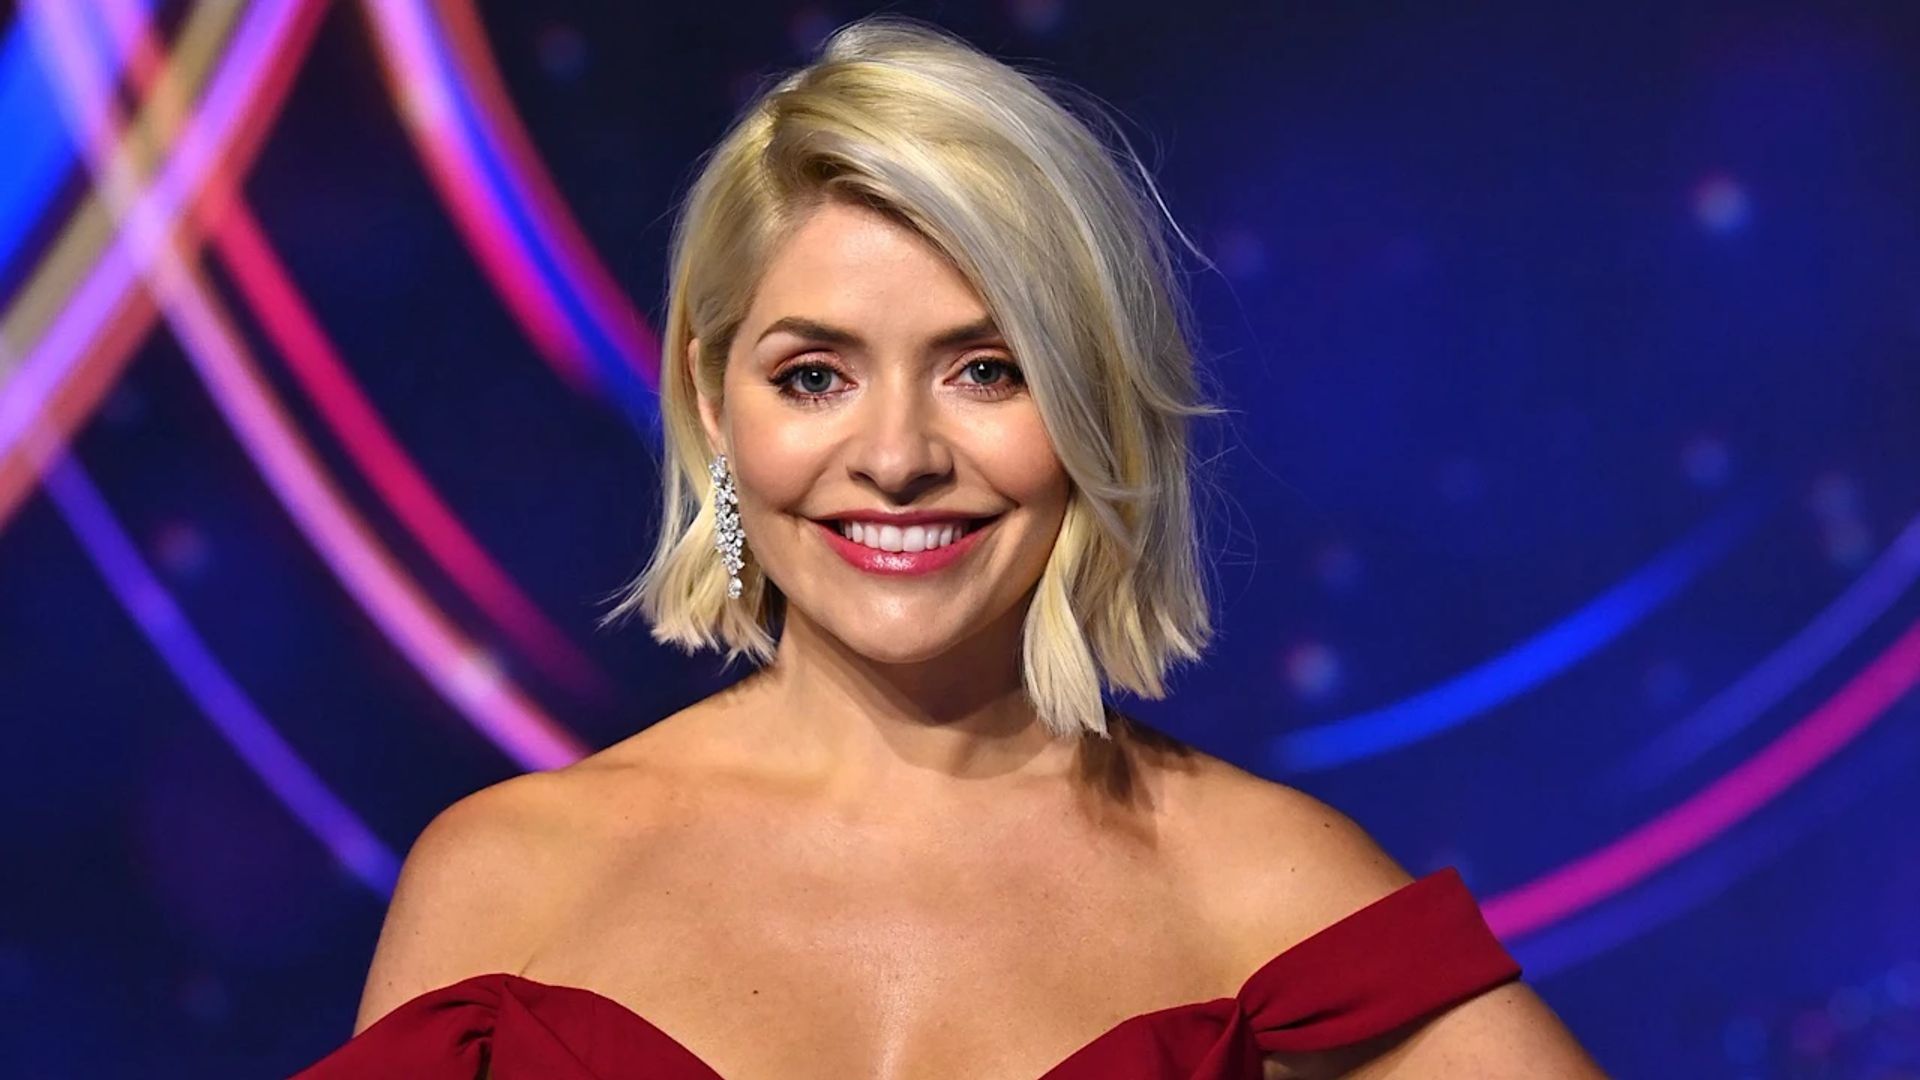 Holly Willoughby pays special tribute to 'beautiful friend' in meaningful update